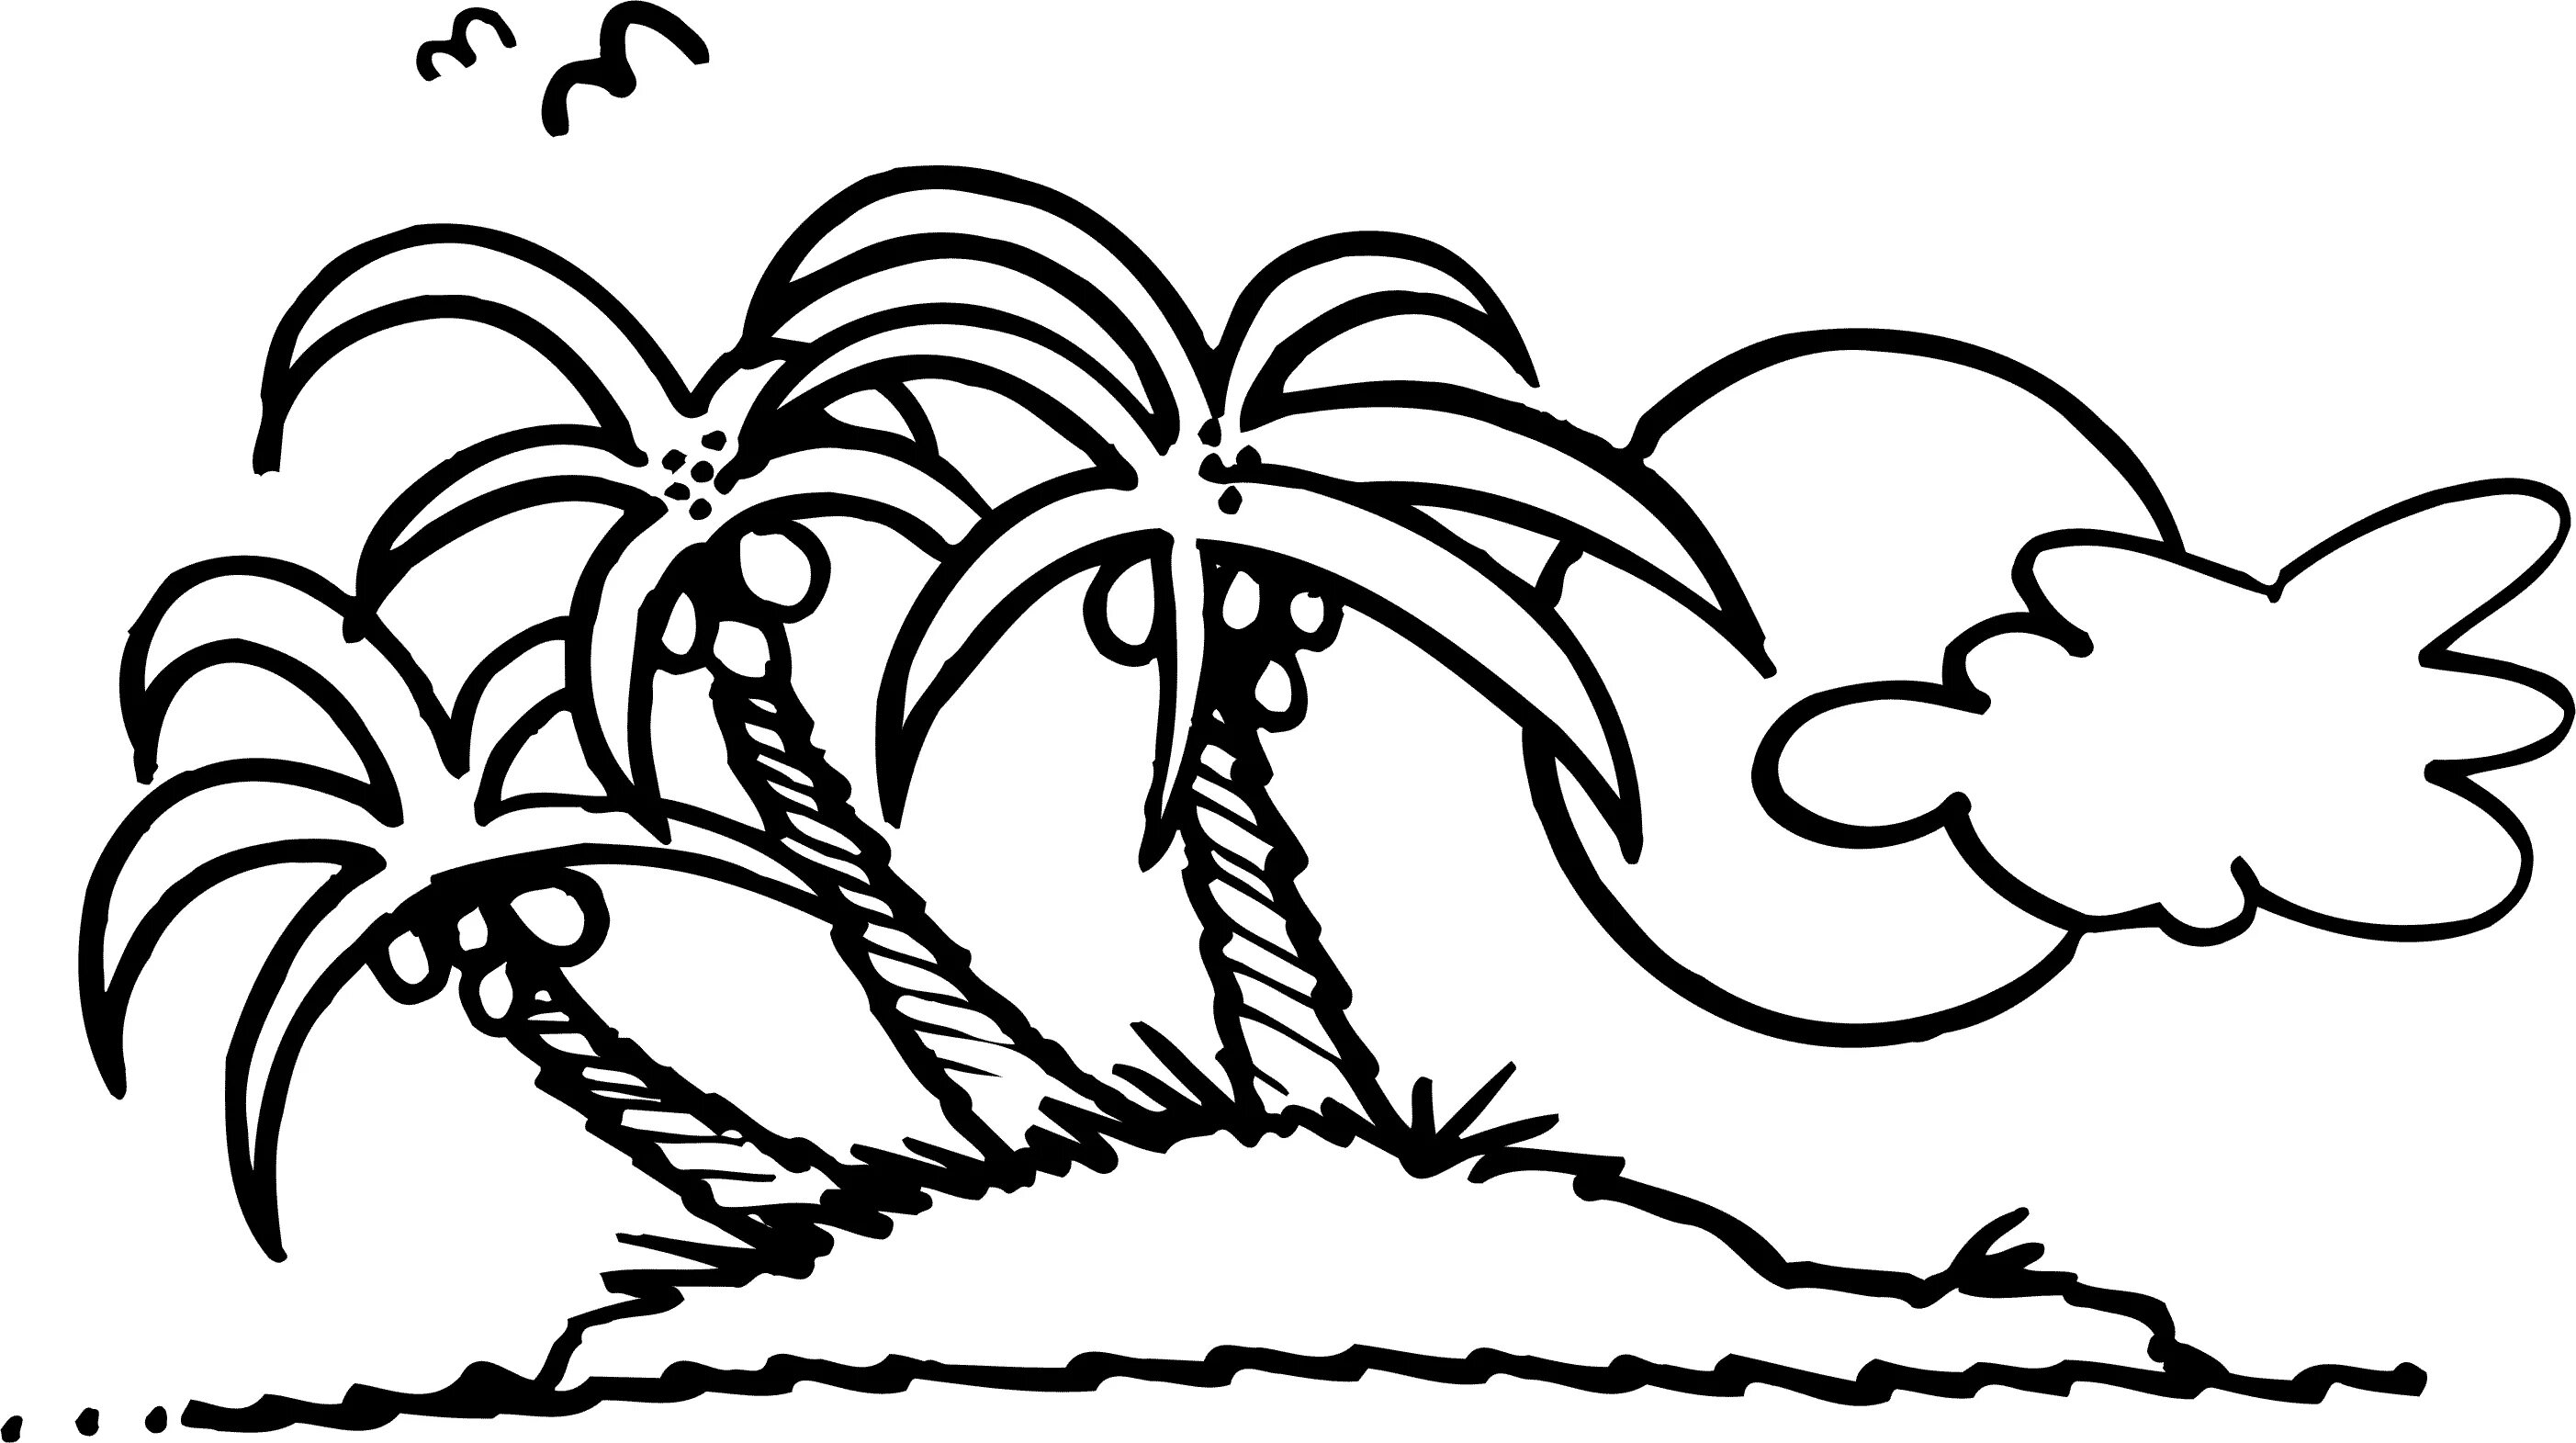 Sky desert island coloring page